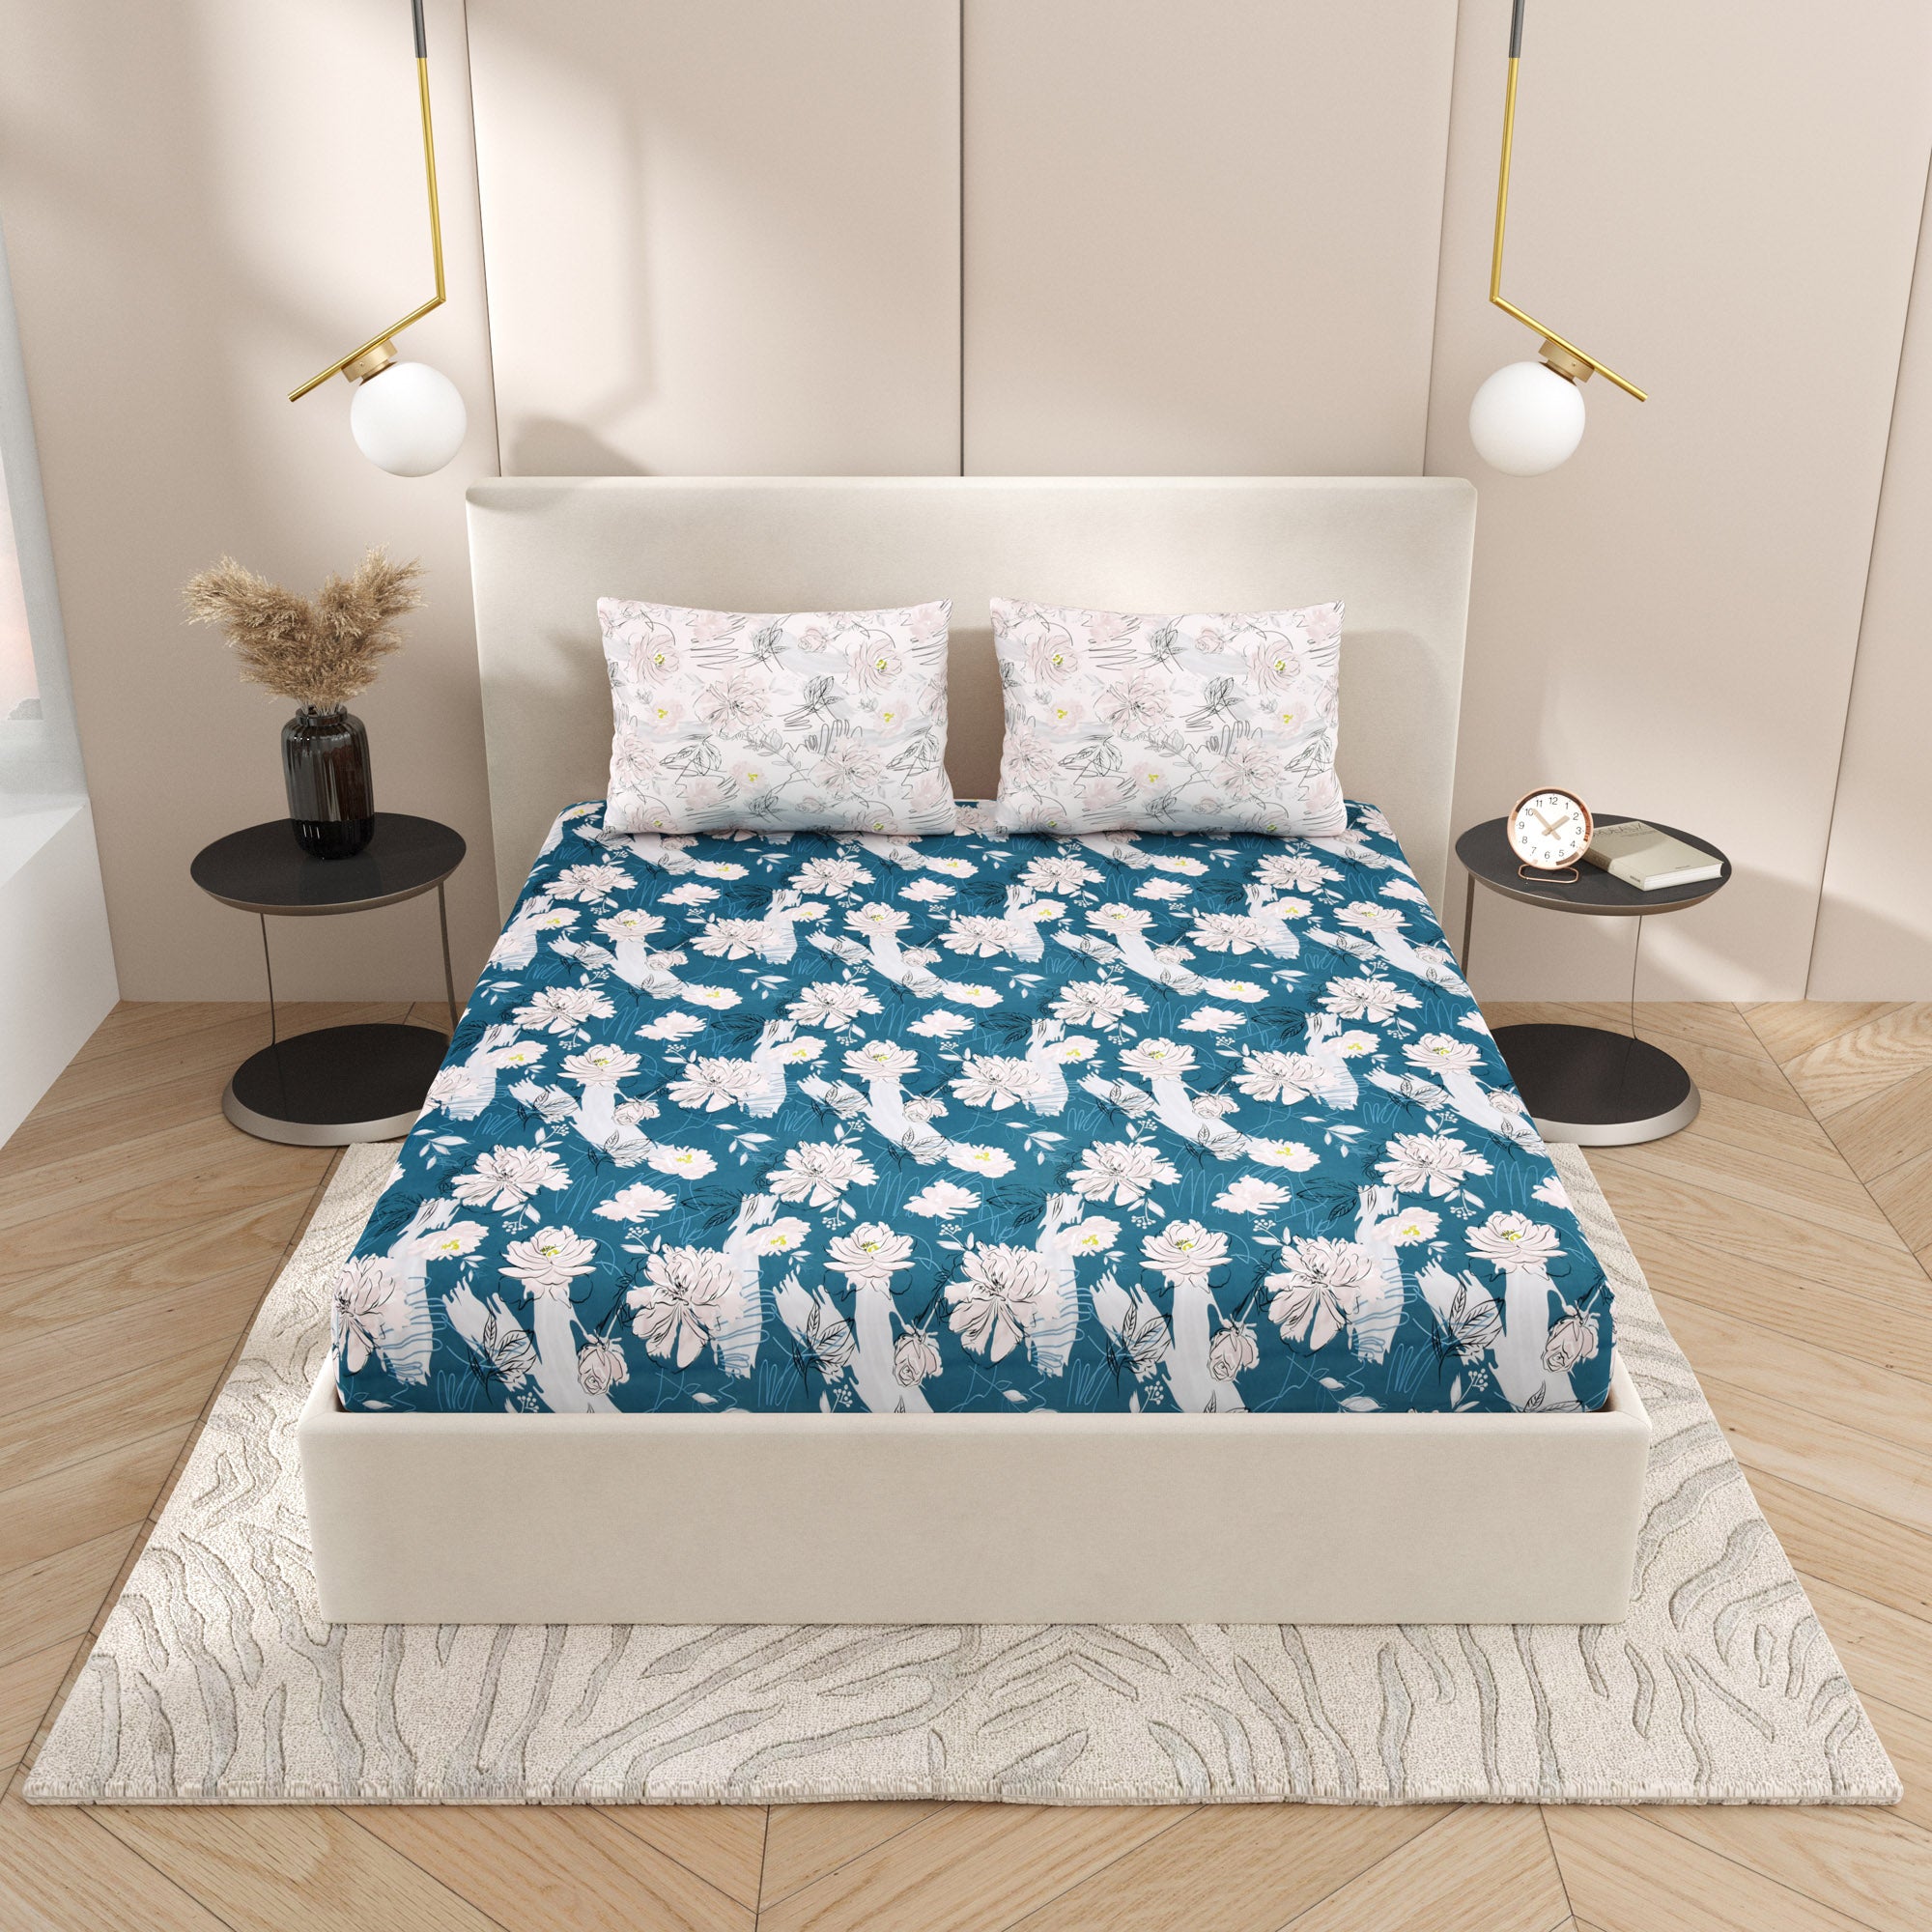 eCraftIndia 250 TC Blue, White Floral Printed Cotton Double Bedsheet With 2 Pillow Covers 1